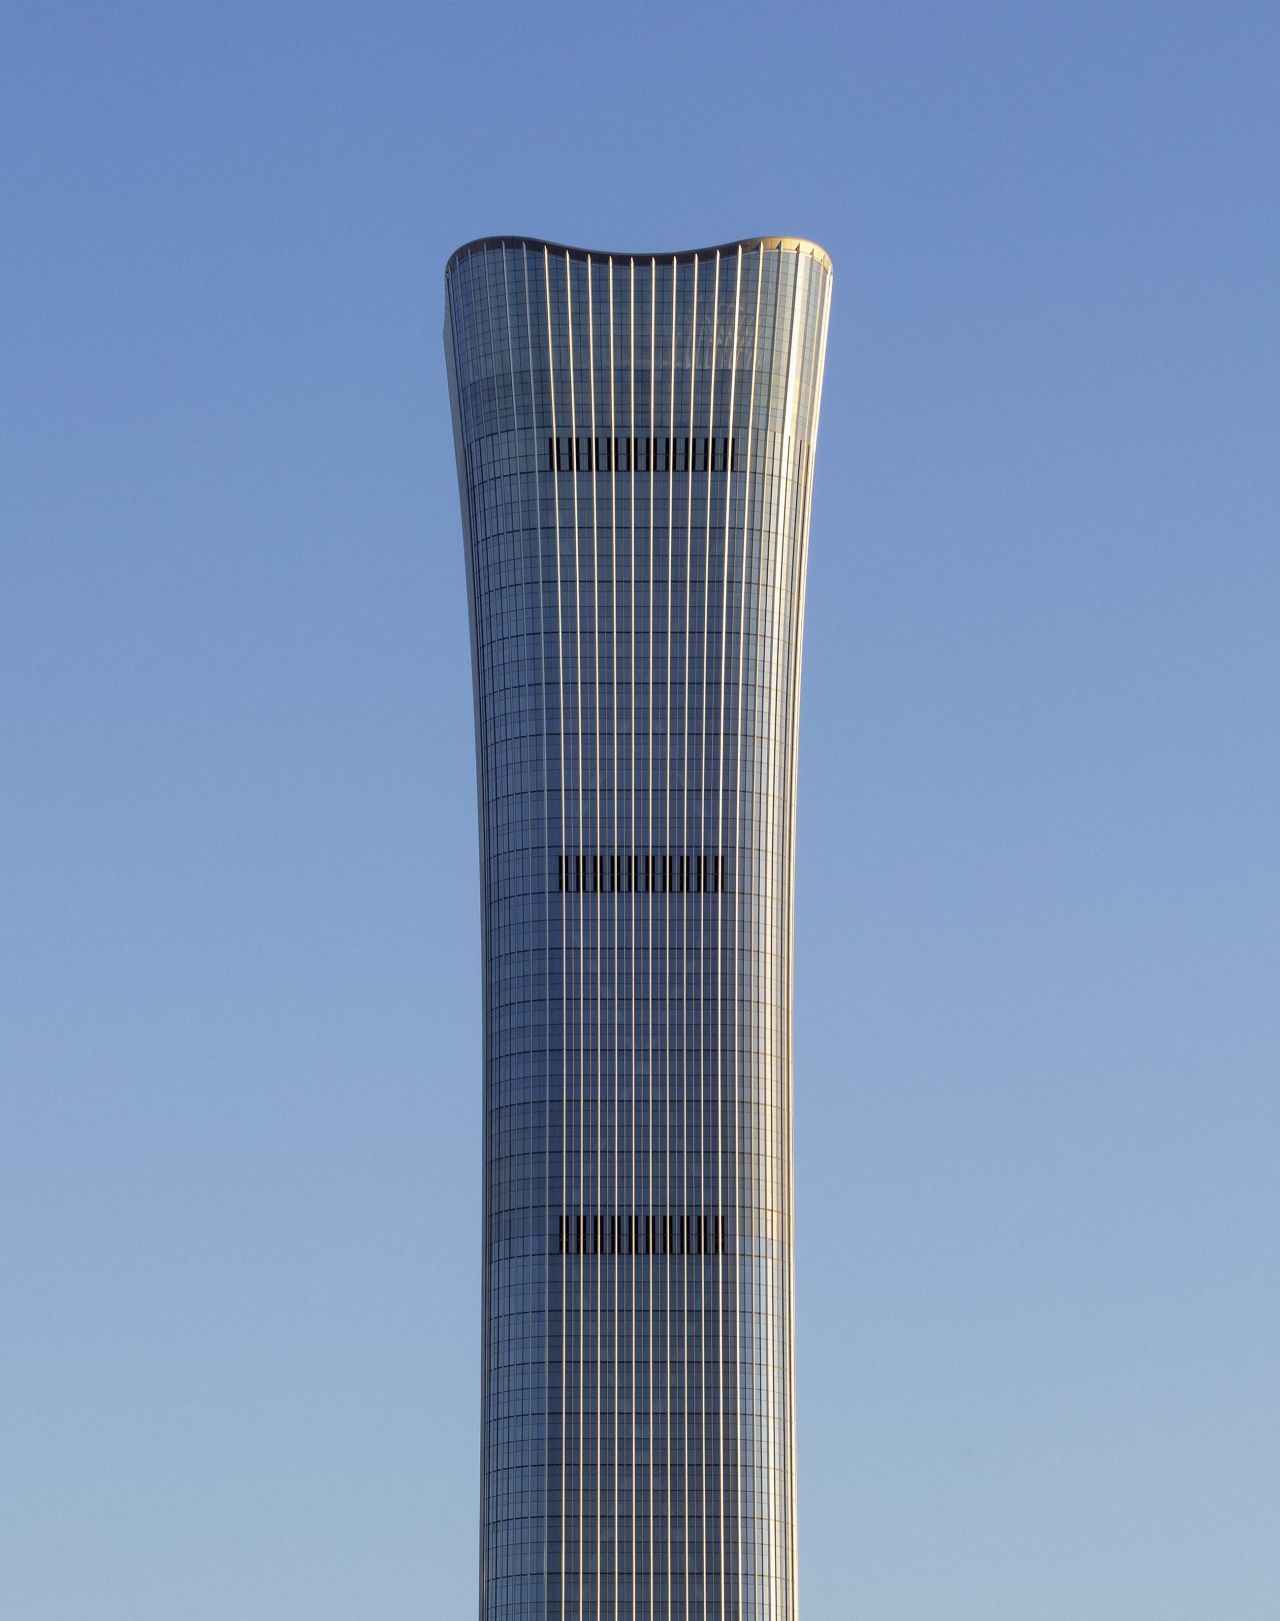 The flared top of Beijing's Citic Tower, the world's eighth-tallest skyscraper.